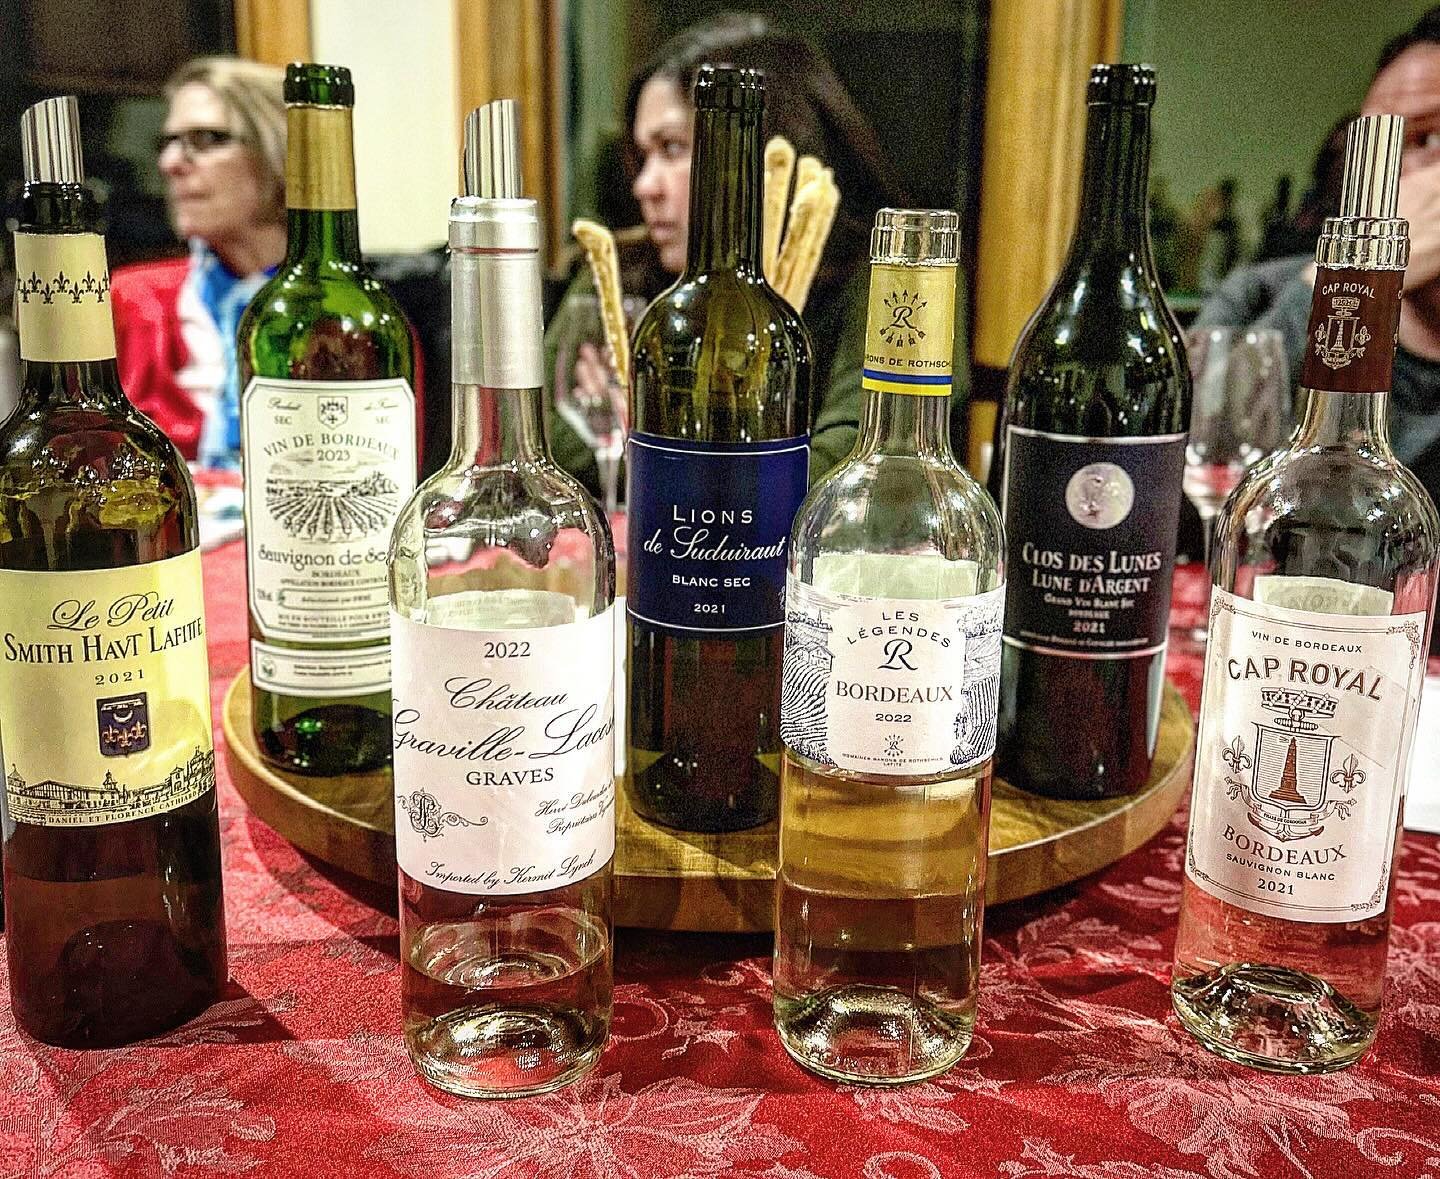 🇫🇷 Bordeaux Blanc blind tasting session is in the books! 🇫🇷 
.
Such a wide variety of wines on the table from our tasting group a few nights back&hellip; all of them were so different and nuanced! What a treat to get together after a few weeks of